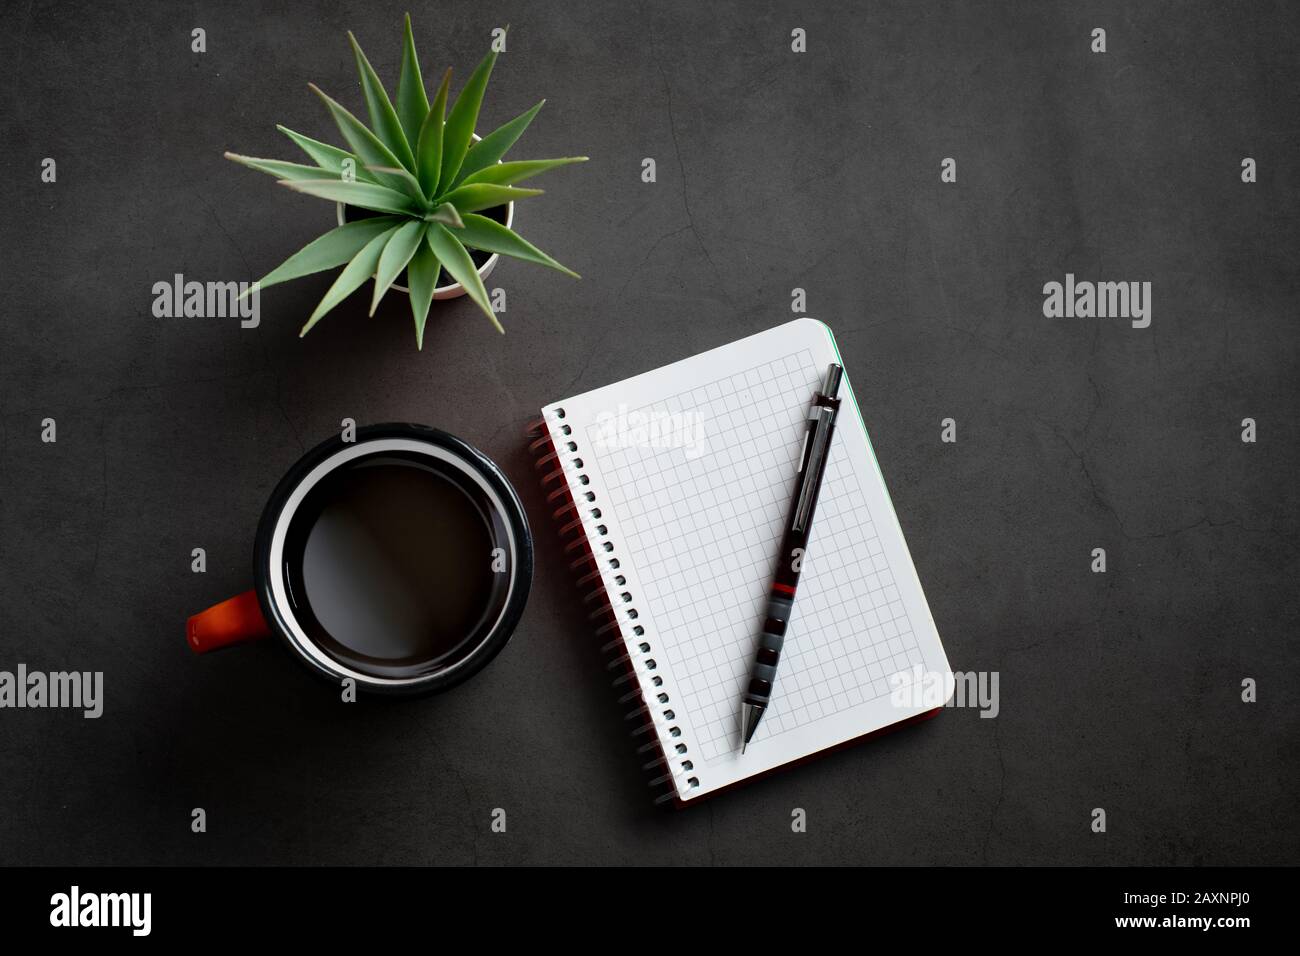 table top view with notepad, coffee and plant on black background. Stock Photo